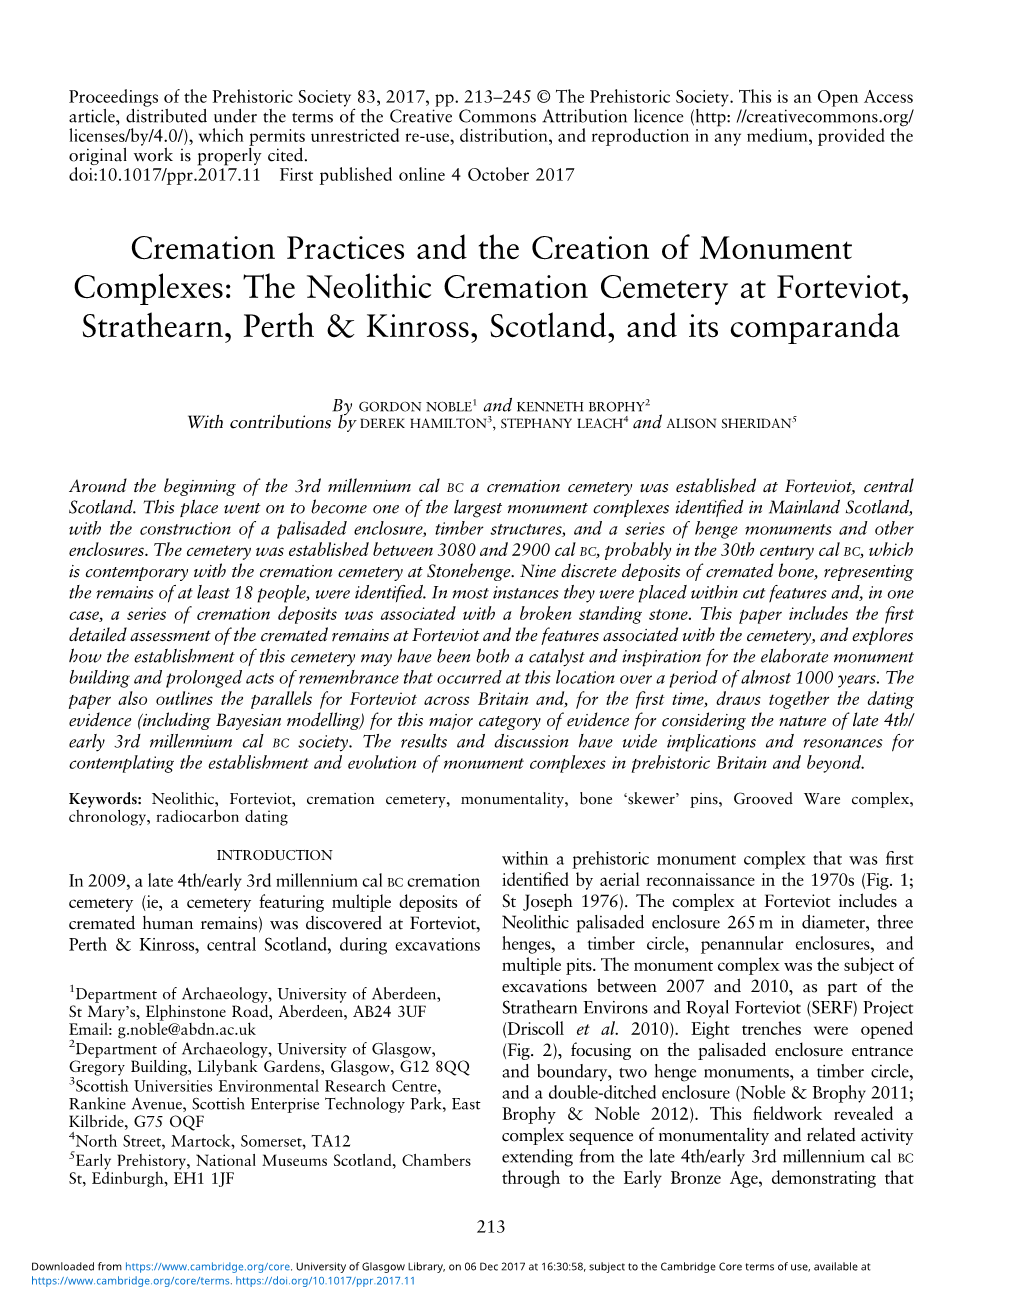 Cremation Practices and the Creation of Monument Complexes: the Neolithic Cremation Cemetery at Forteviot, Strathearn, Perth & Kinross, Scotland, and Its Comparanda